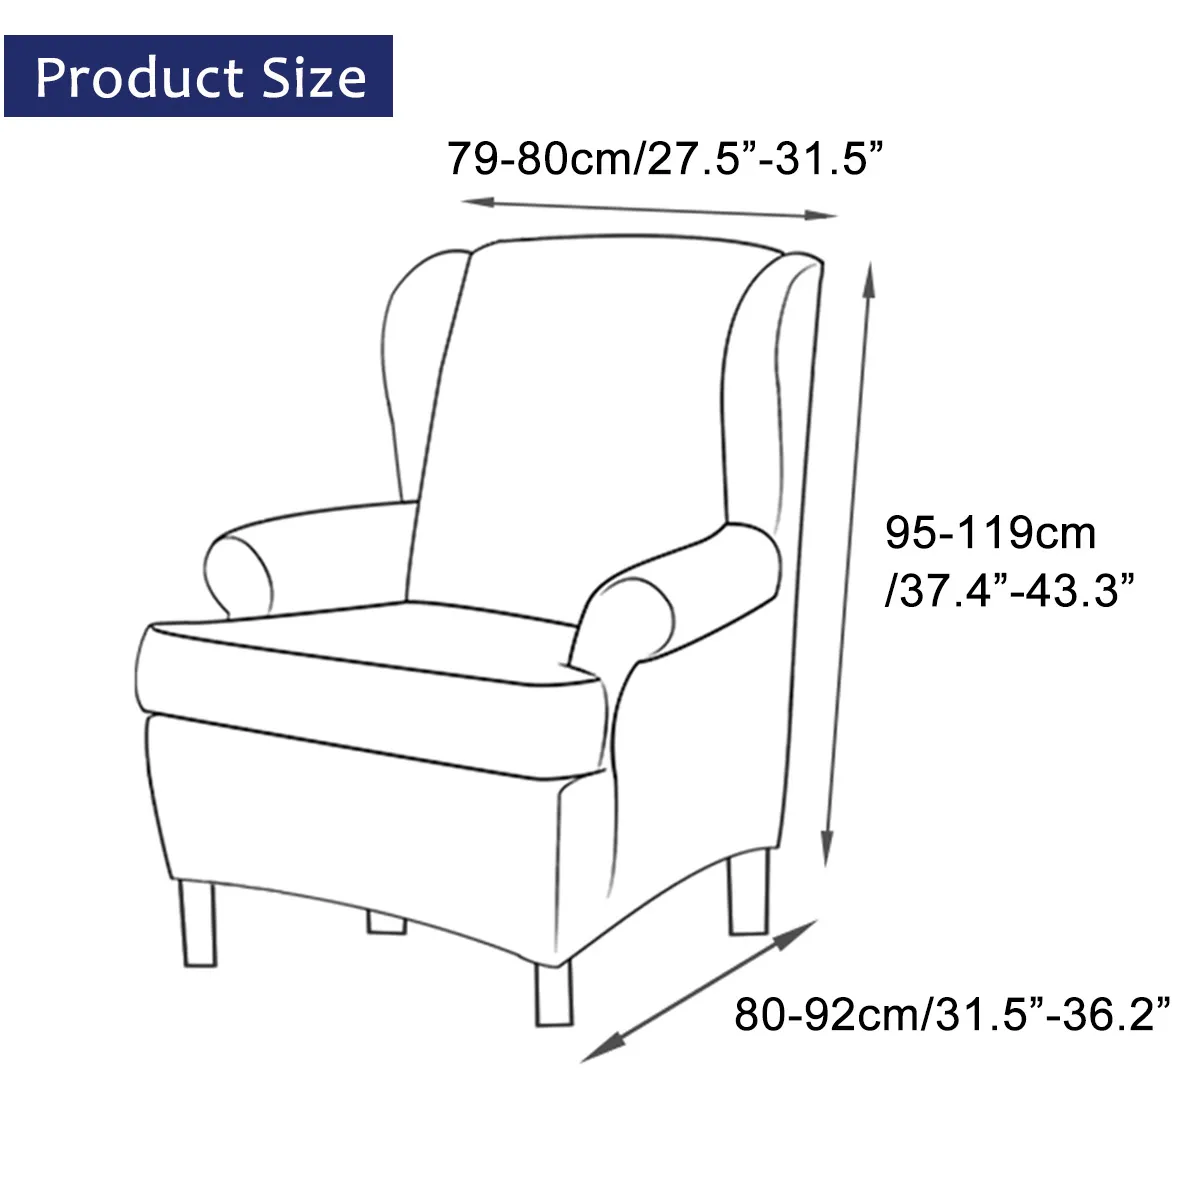 Sloping Arm King Back Stol Cover Elastic fåtölj Wingback Chair Wing Back Stol Cover Stretch Protector Slipcover Protector Y2005279457